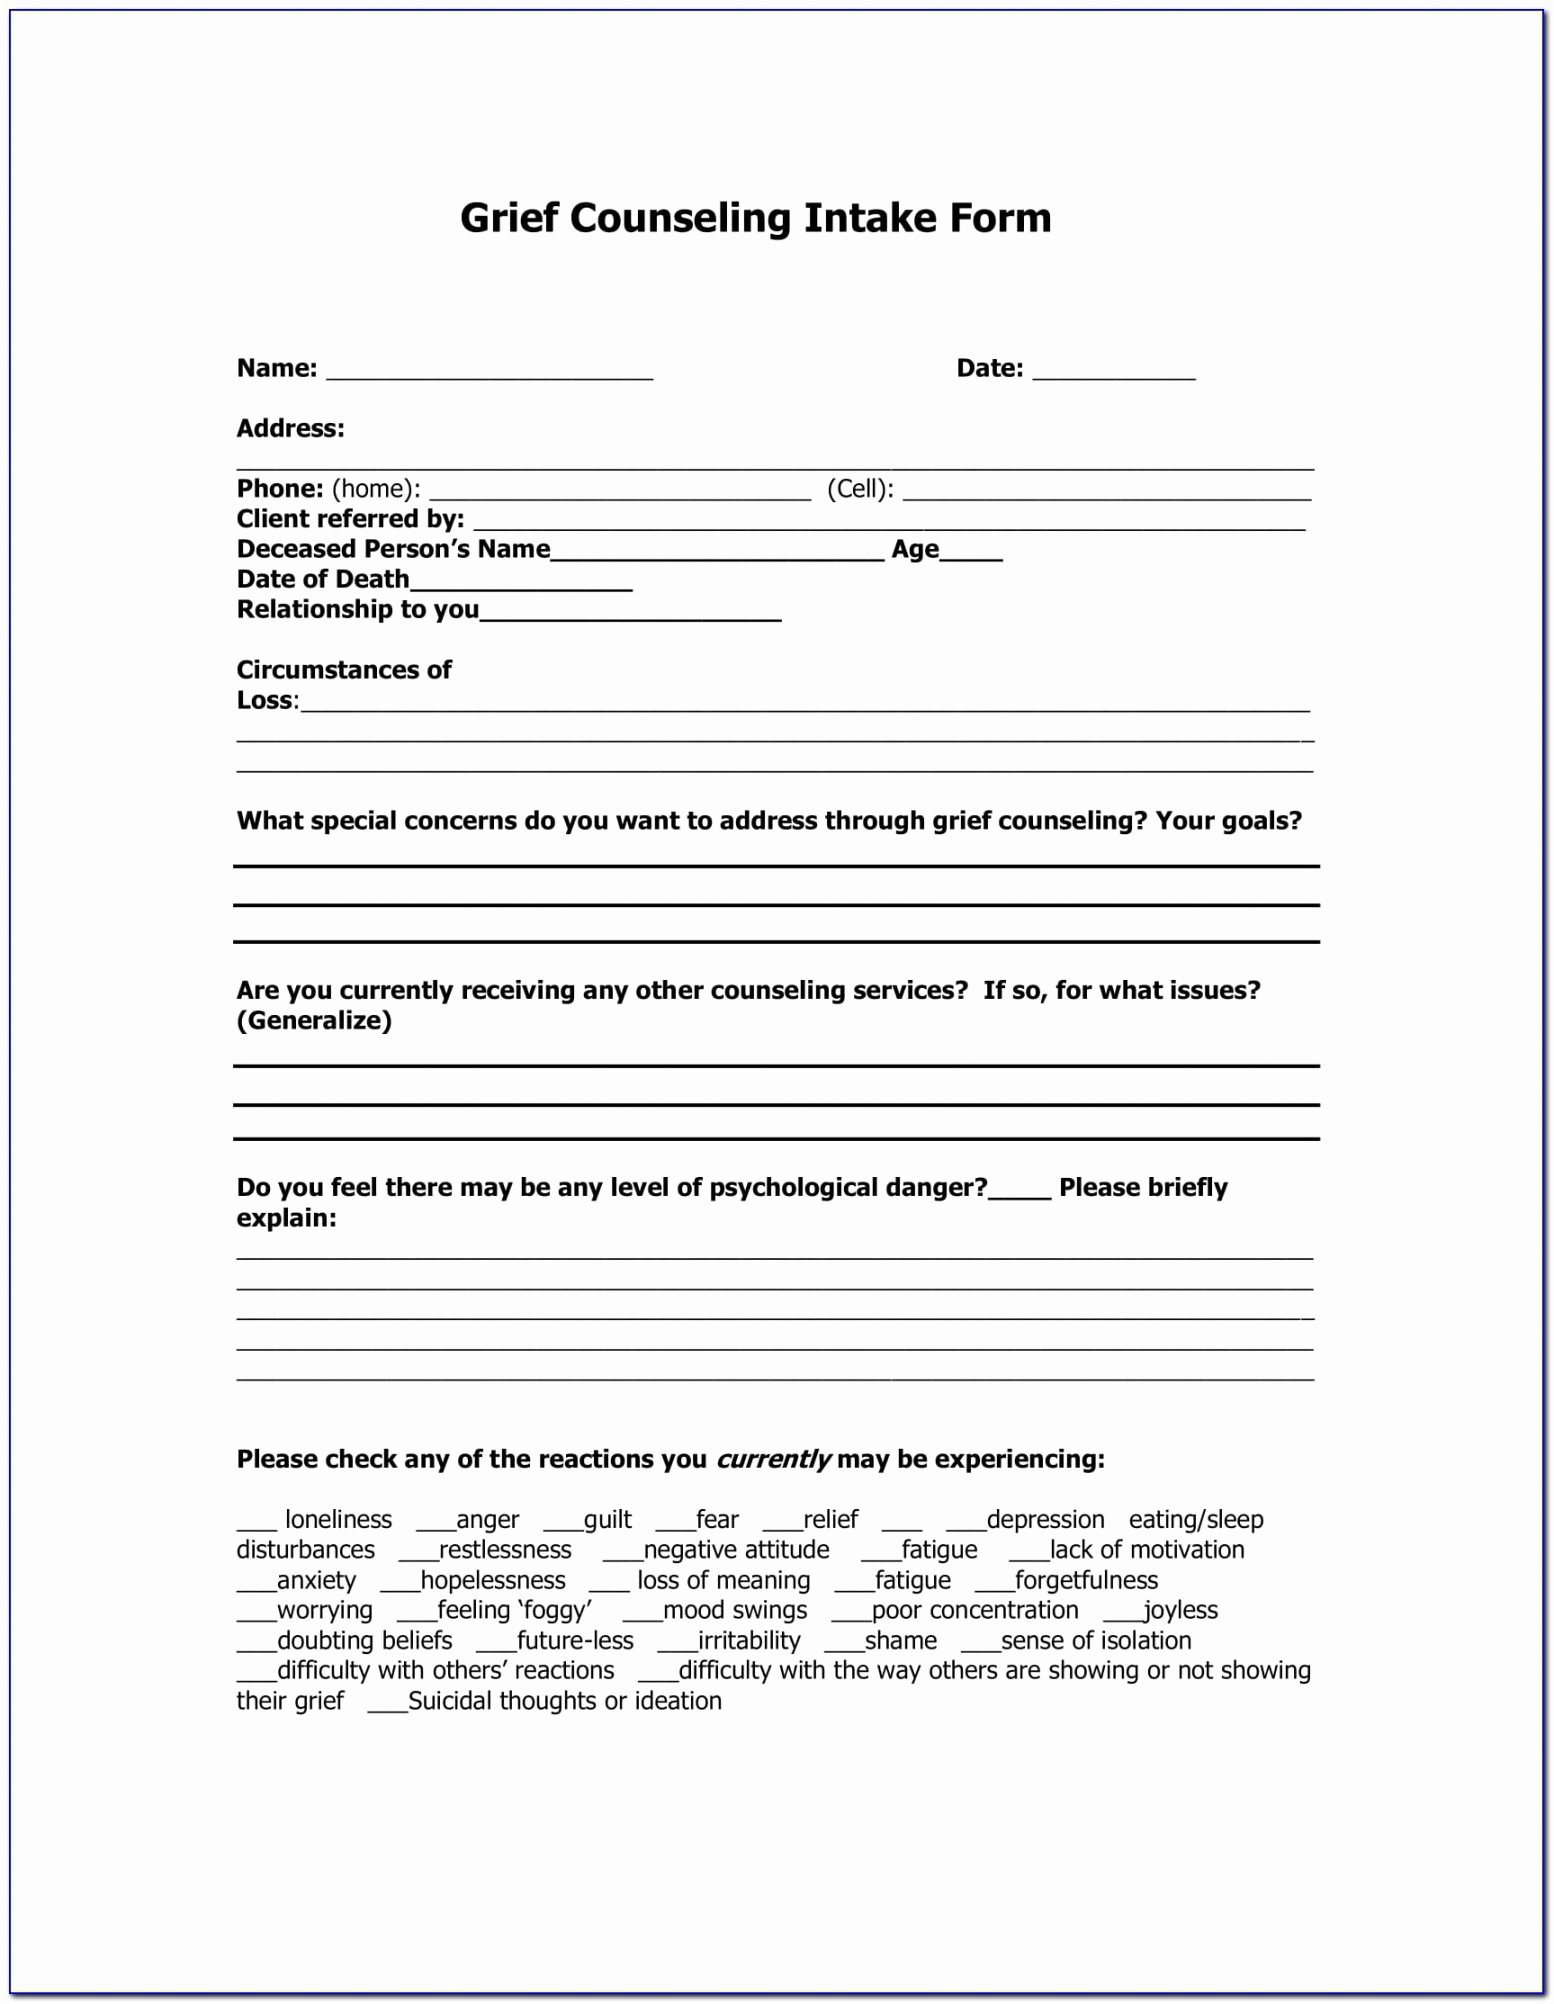 Marriage Counseling Certificate Template Awesome Pre Marriage Counseling Certificate Template